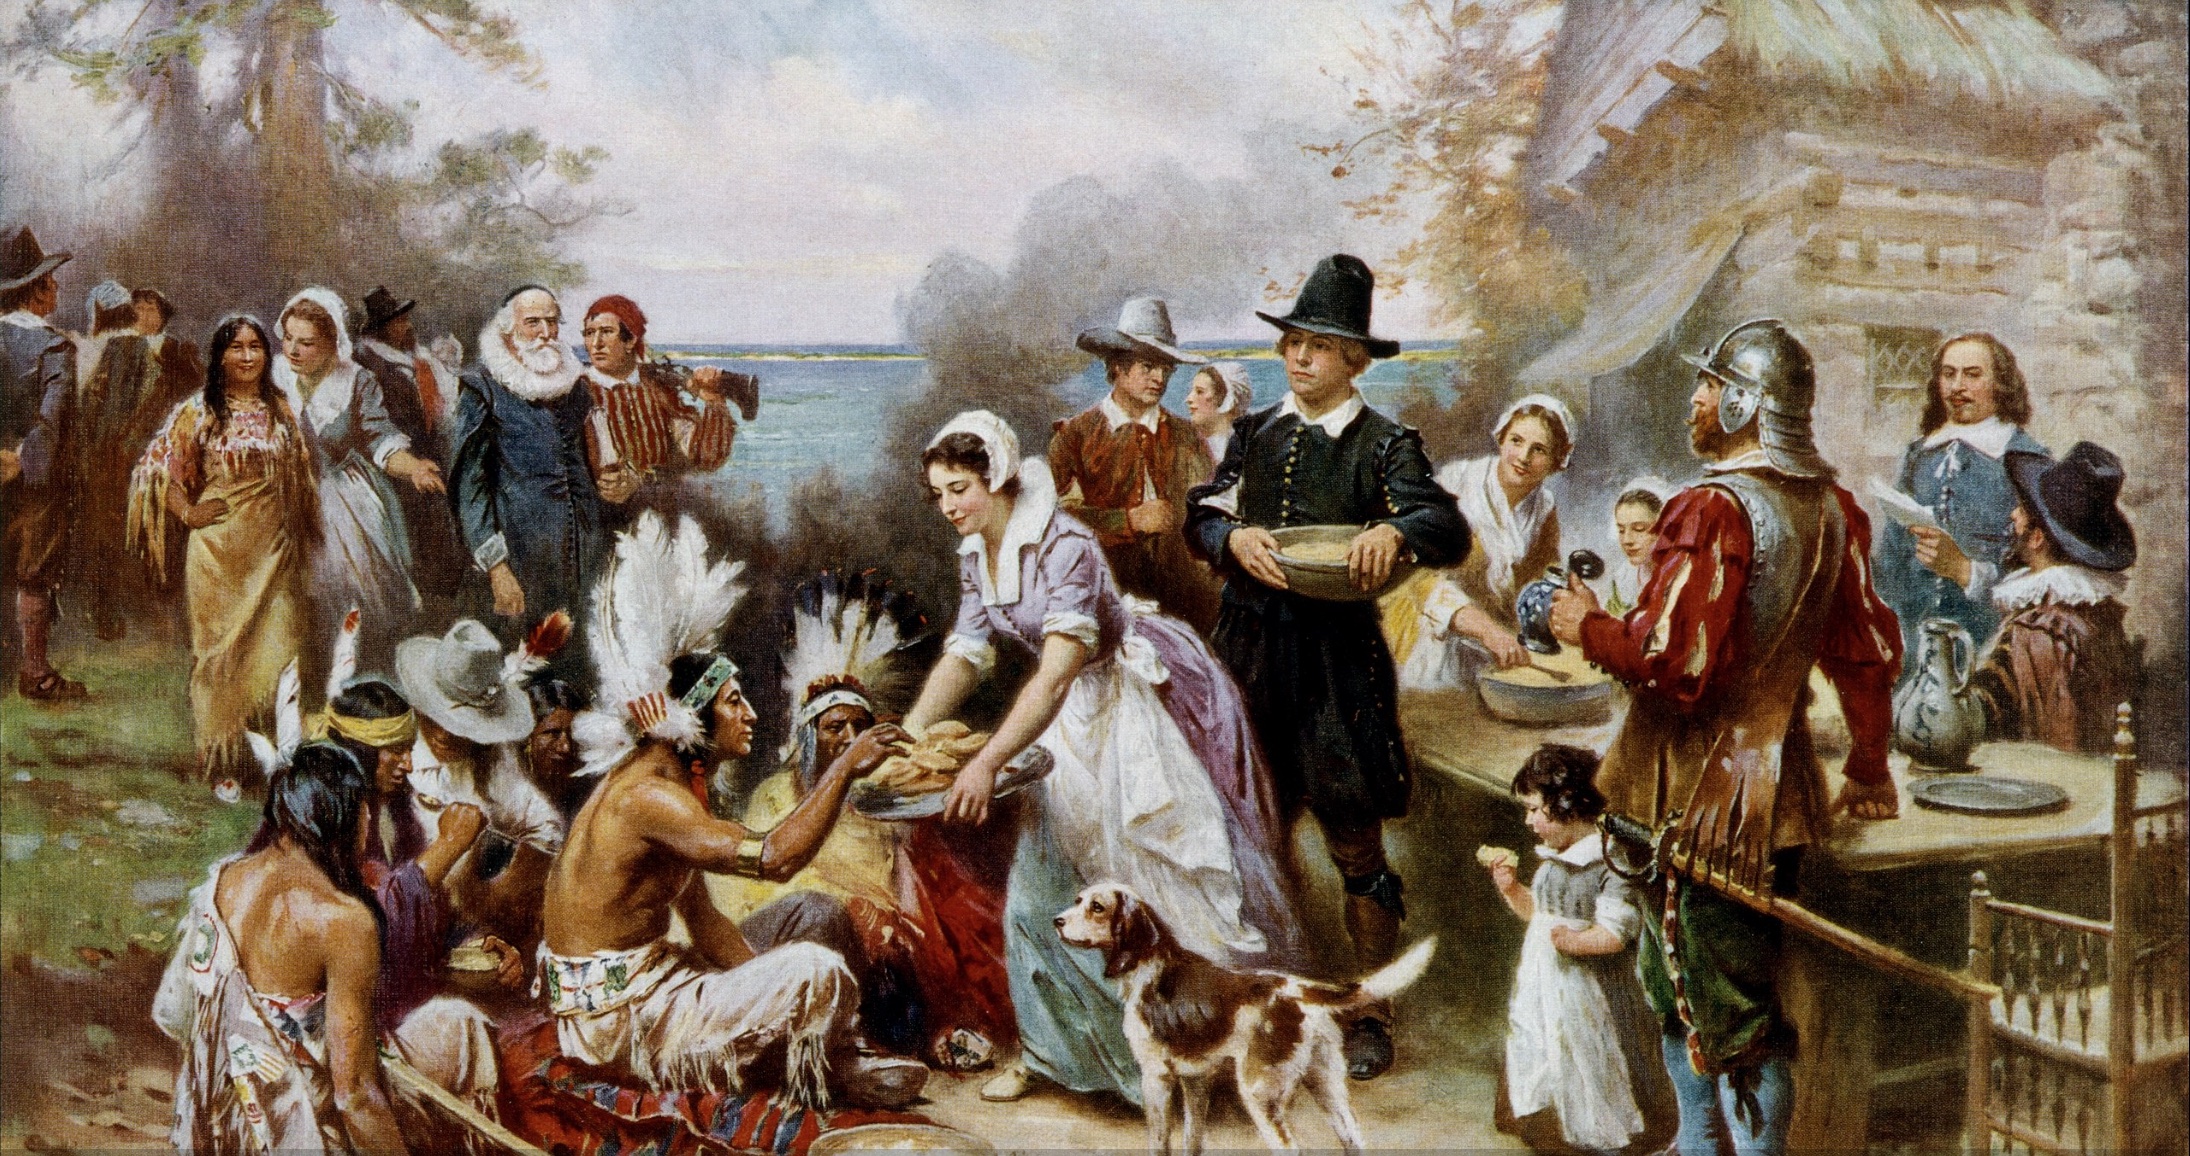 indians and puritans in colonial america